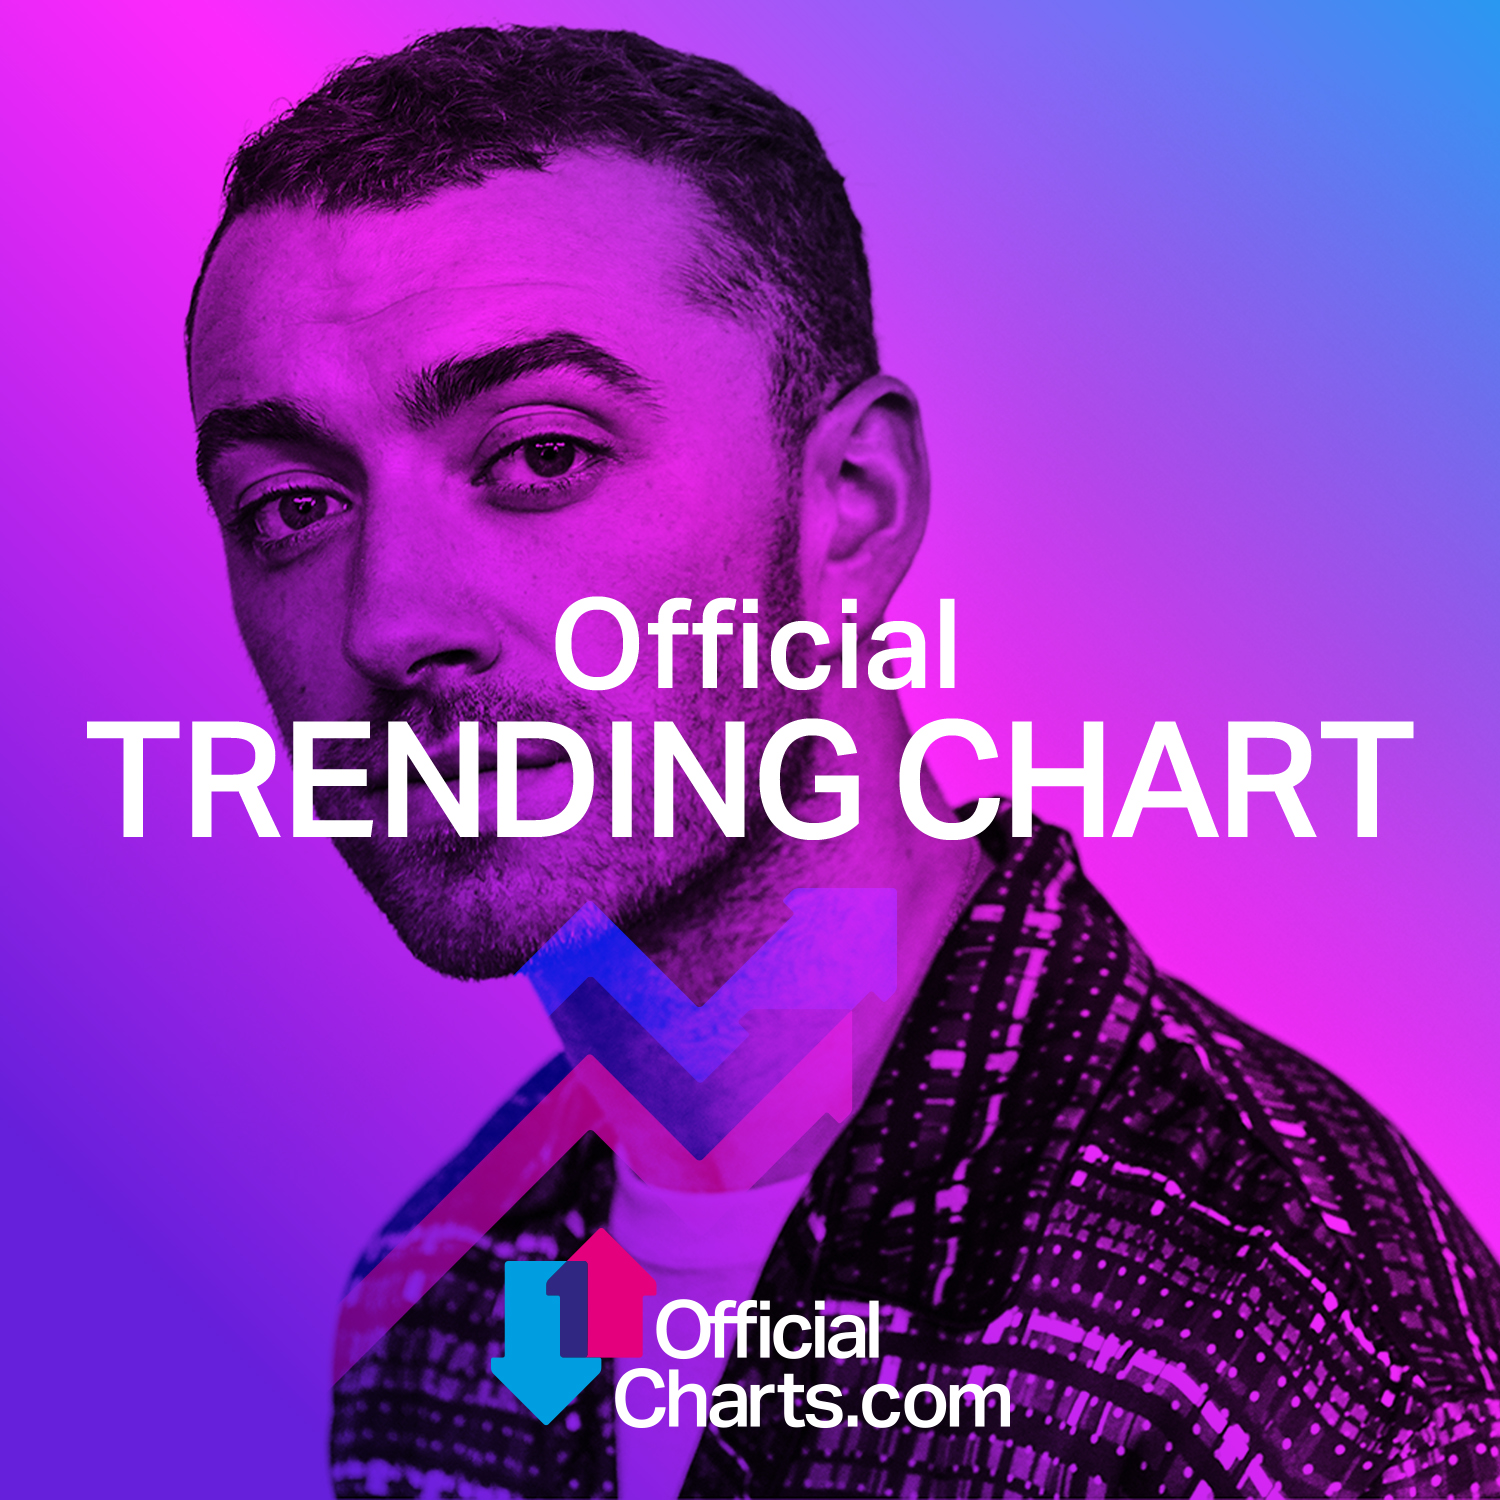 Sam Smith tops the Official Trending Chart1500 x 1500